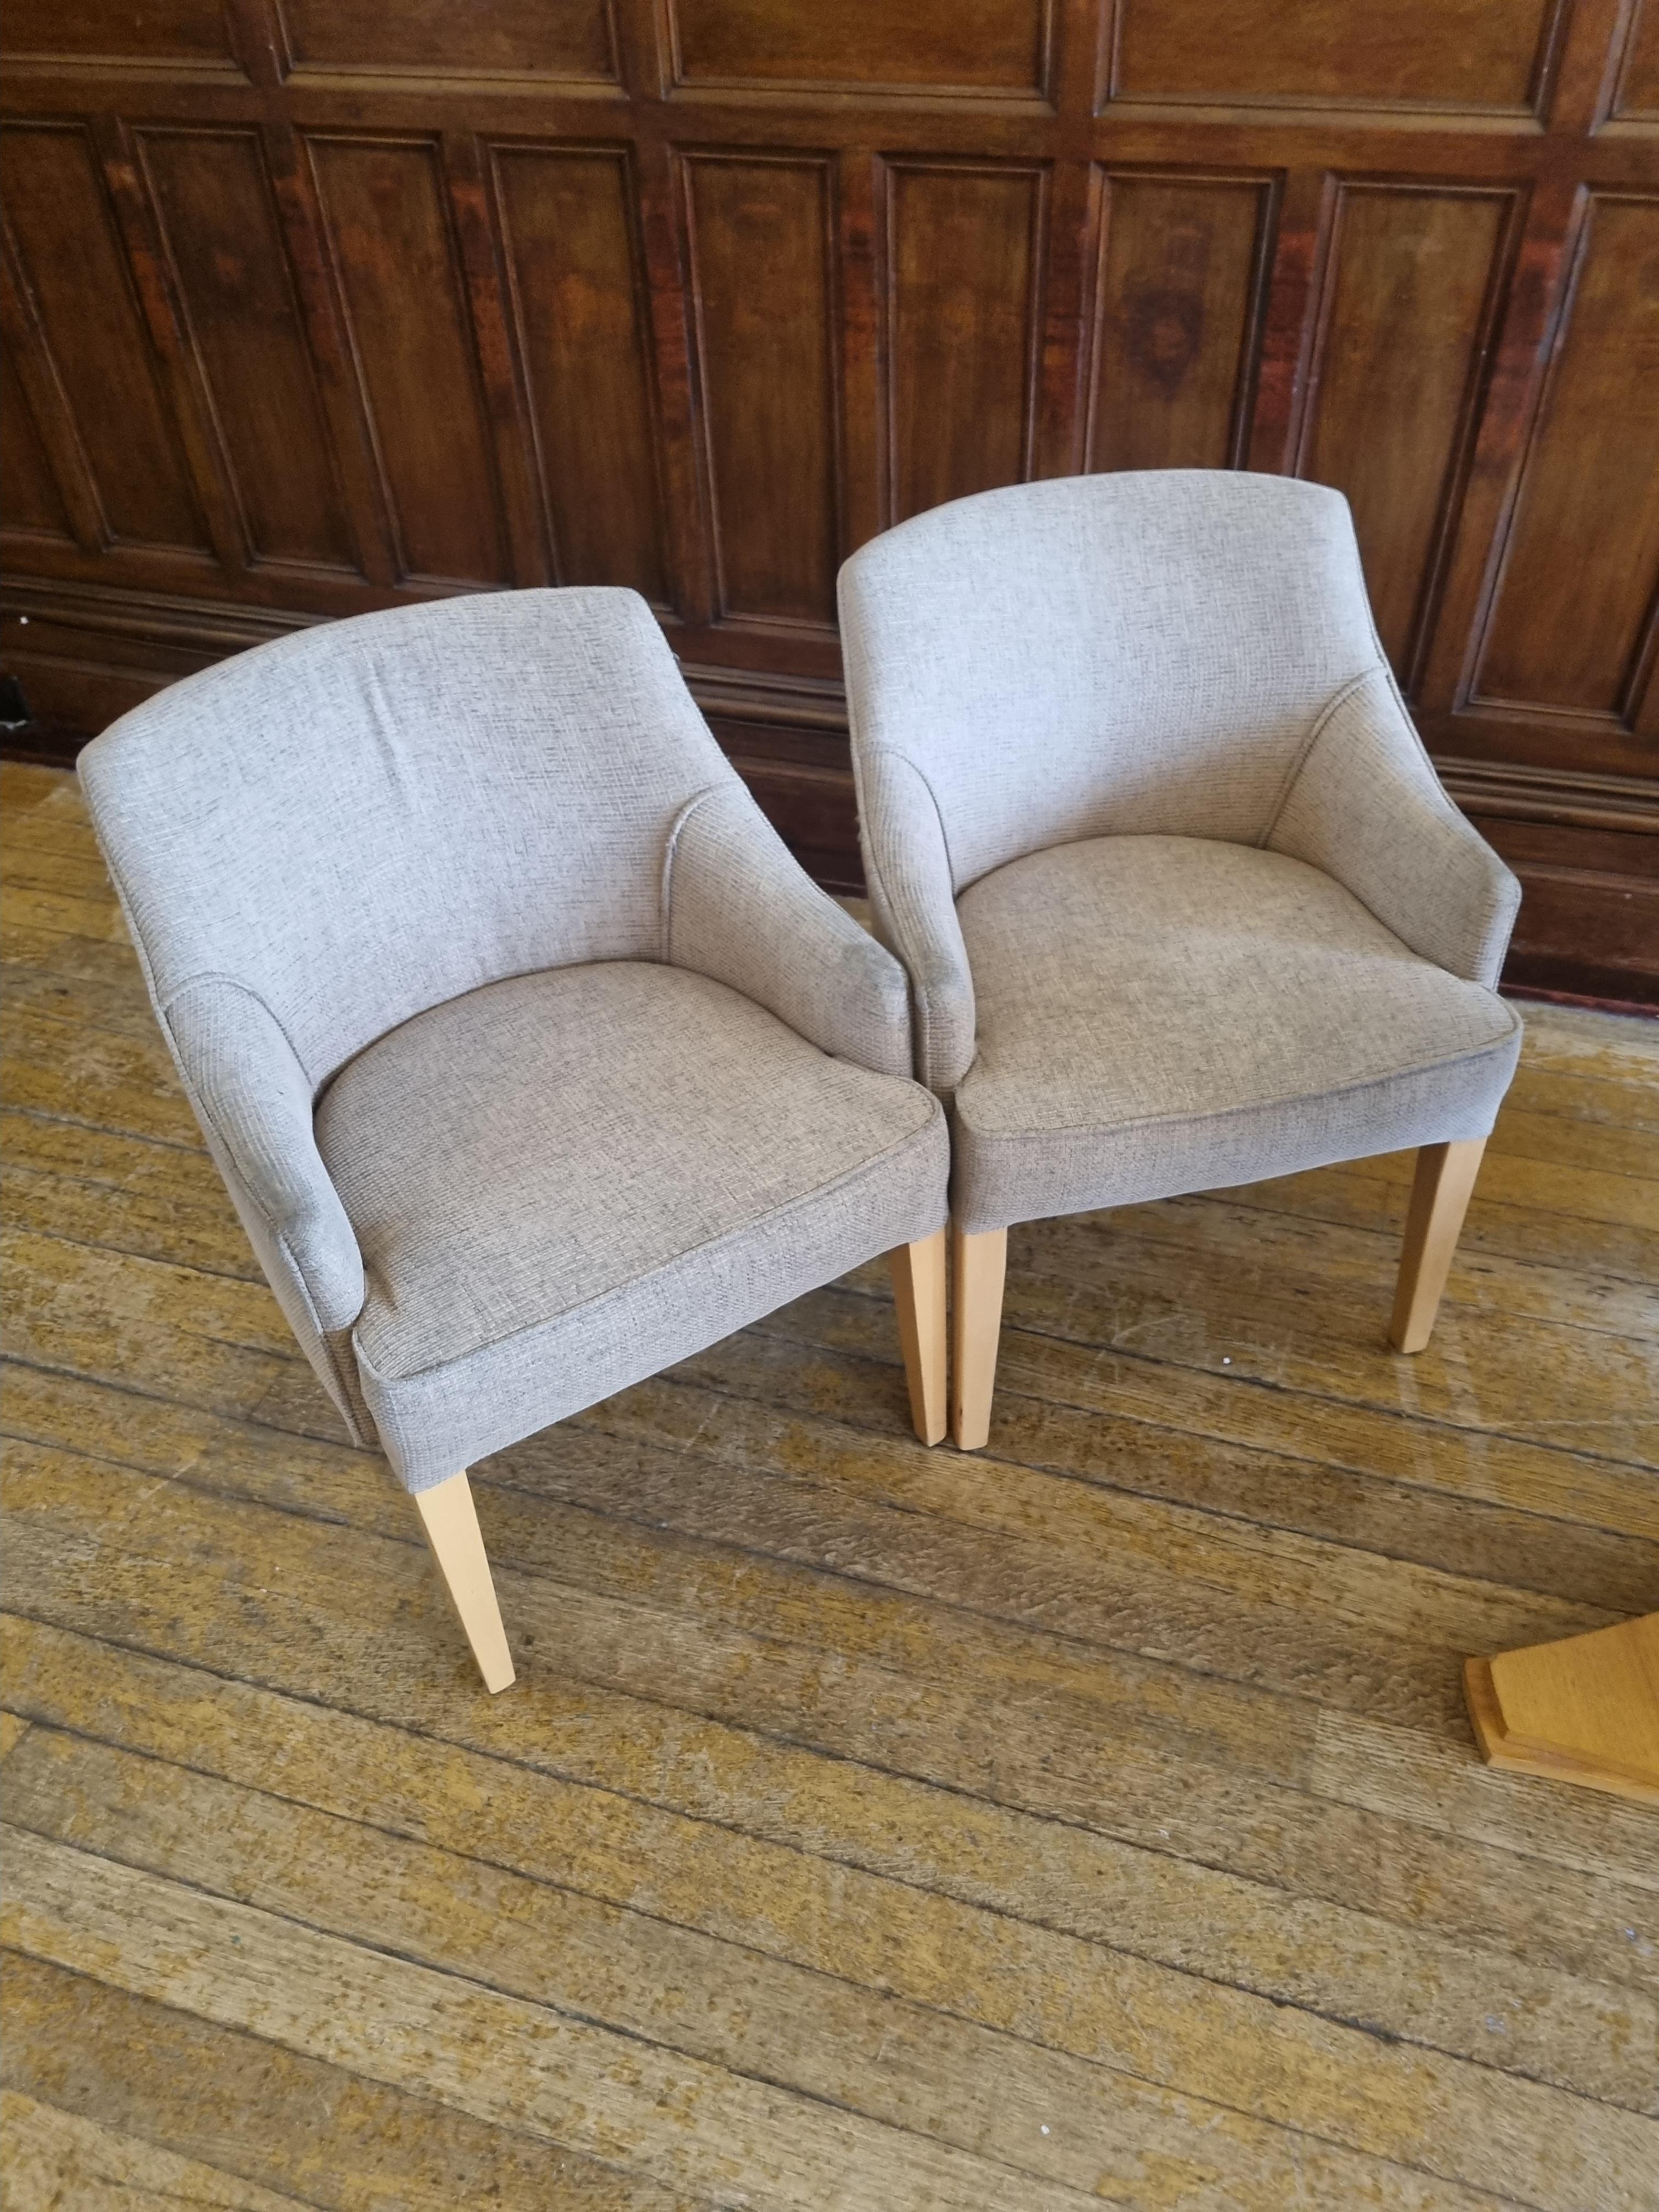 A Pair Of G Furniture Beige Arm Chair On Wooden Legs W 550mm D 420mm 740mm - Image 2 of 2